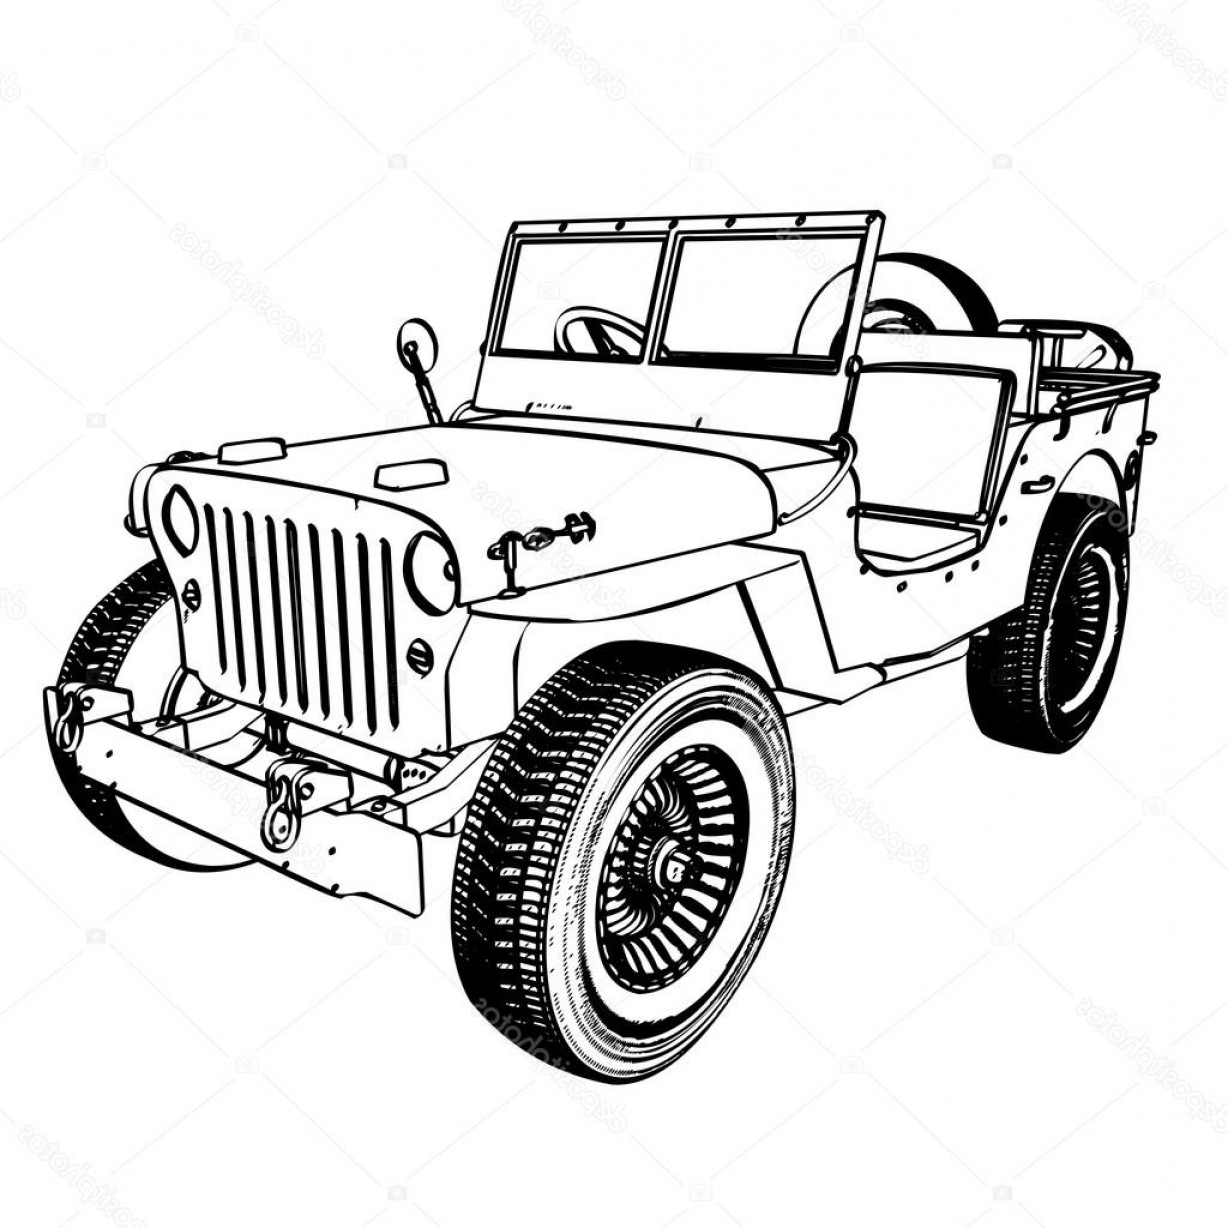 Download Jeep Silhouette Vector at GetDrawings.com | Free for personal use Jeep Silhouette Vector of your ...